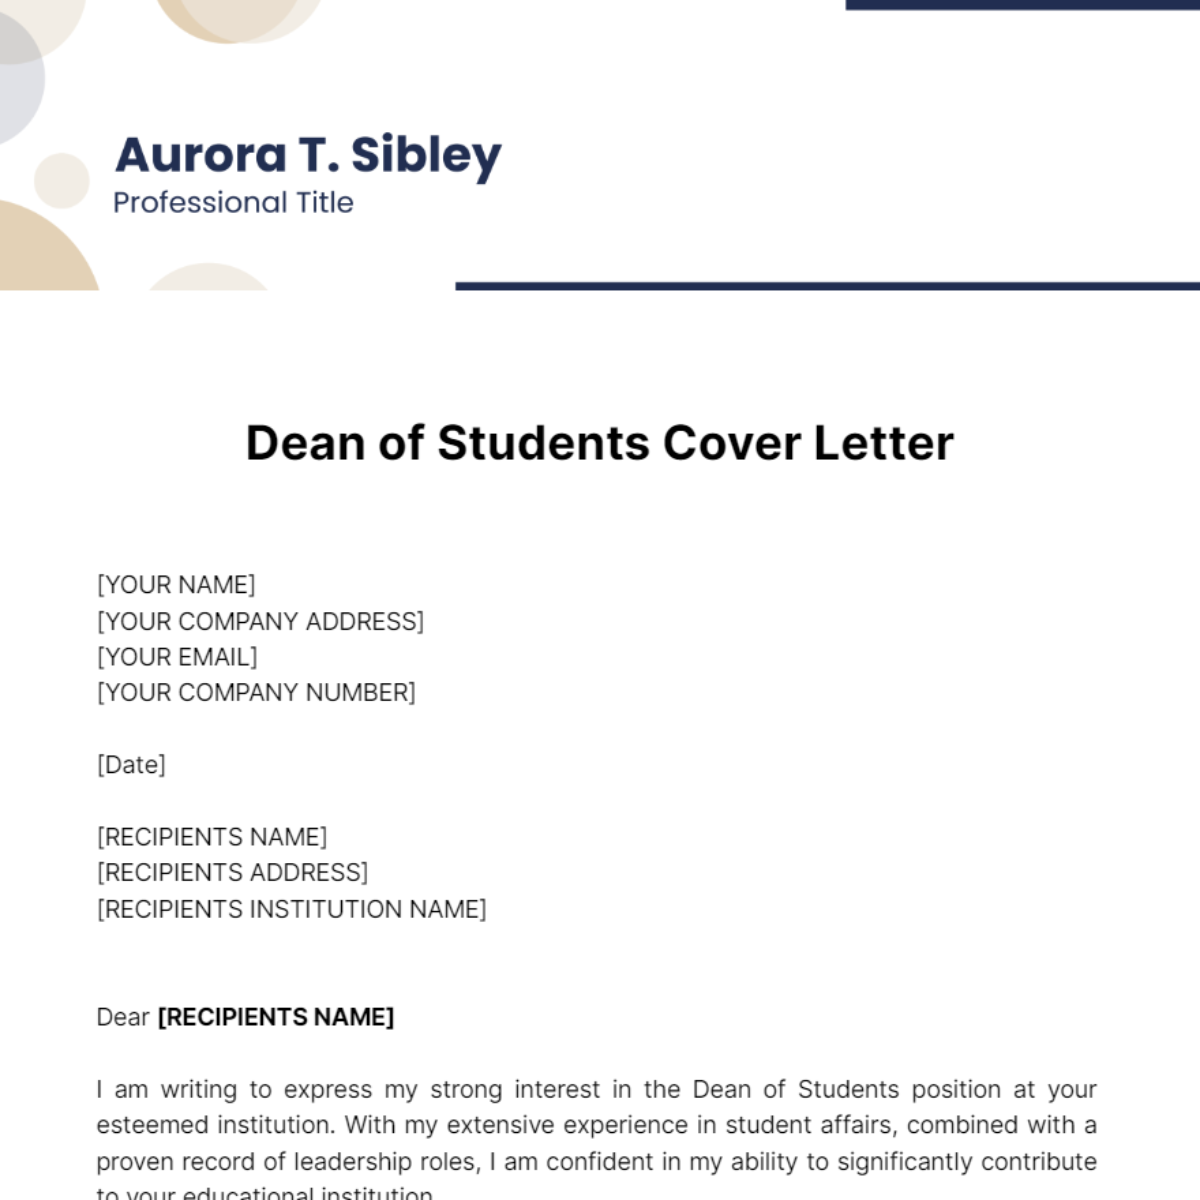 Dean of Students Cover Letter Template